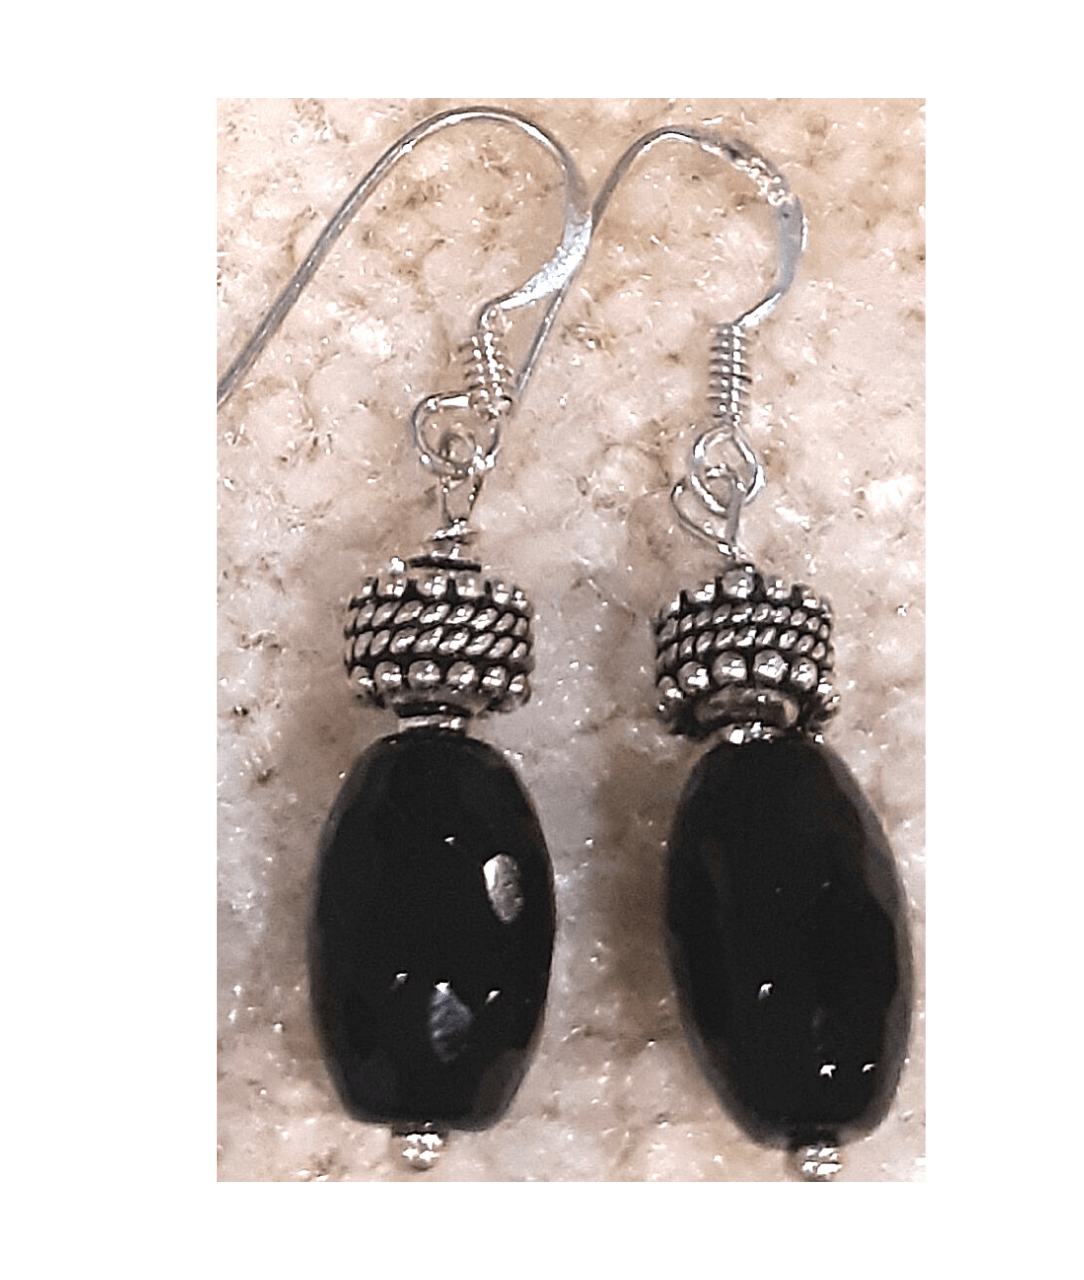 Faceted Black Onyx and Bead Sterling Silver Dangle Earrings Approximately 1 3/4"